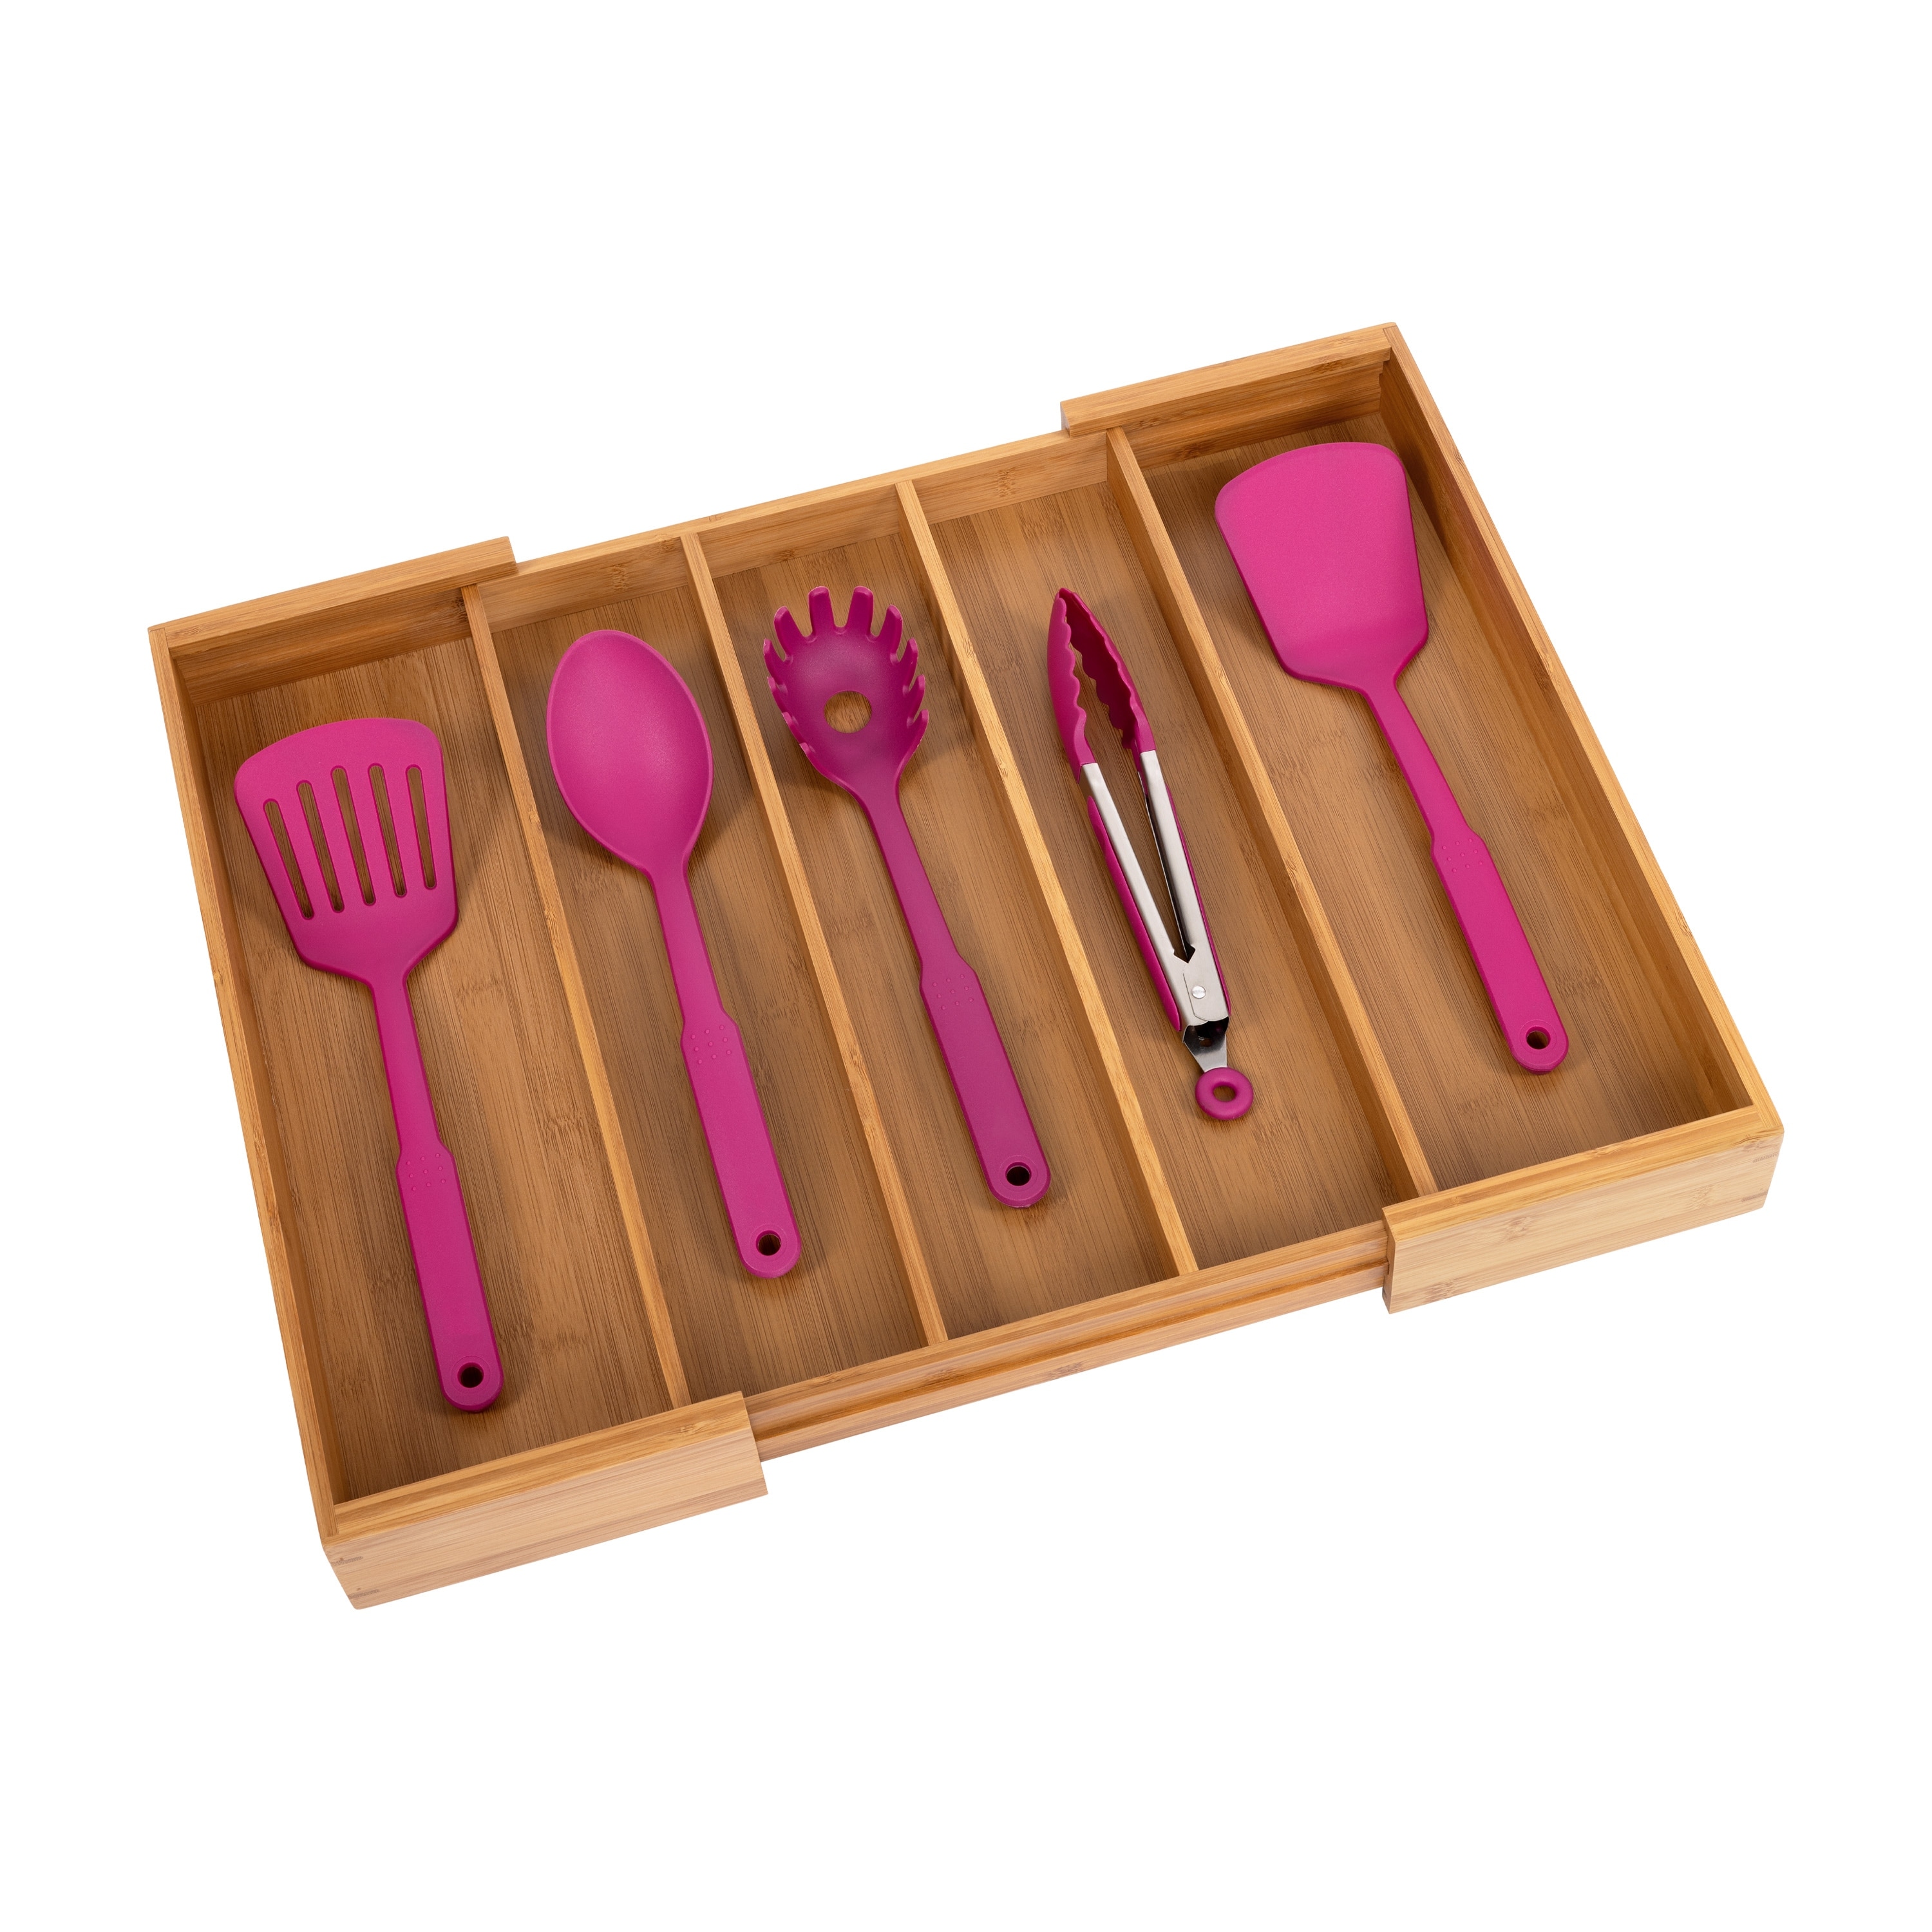 https://ak1.ostkcdn.com/images/products/is/images/direct/eb387a53bae6e462e512fa0e44af724469b2b4e8/Seville-Classics-Bamboo-Expandable-5-Large-Compartment-Adjustable-Cutlery-Drawer-Tray-Organizer.jpg